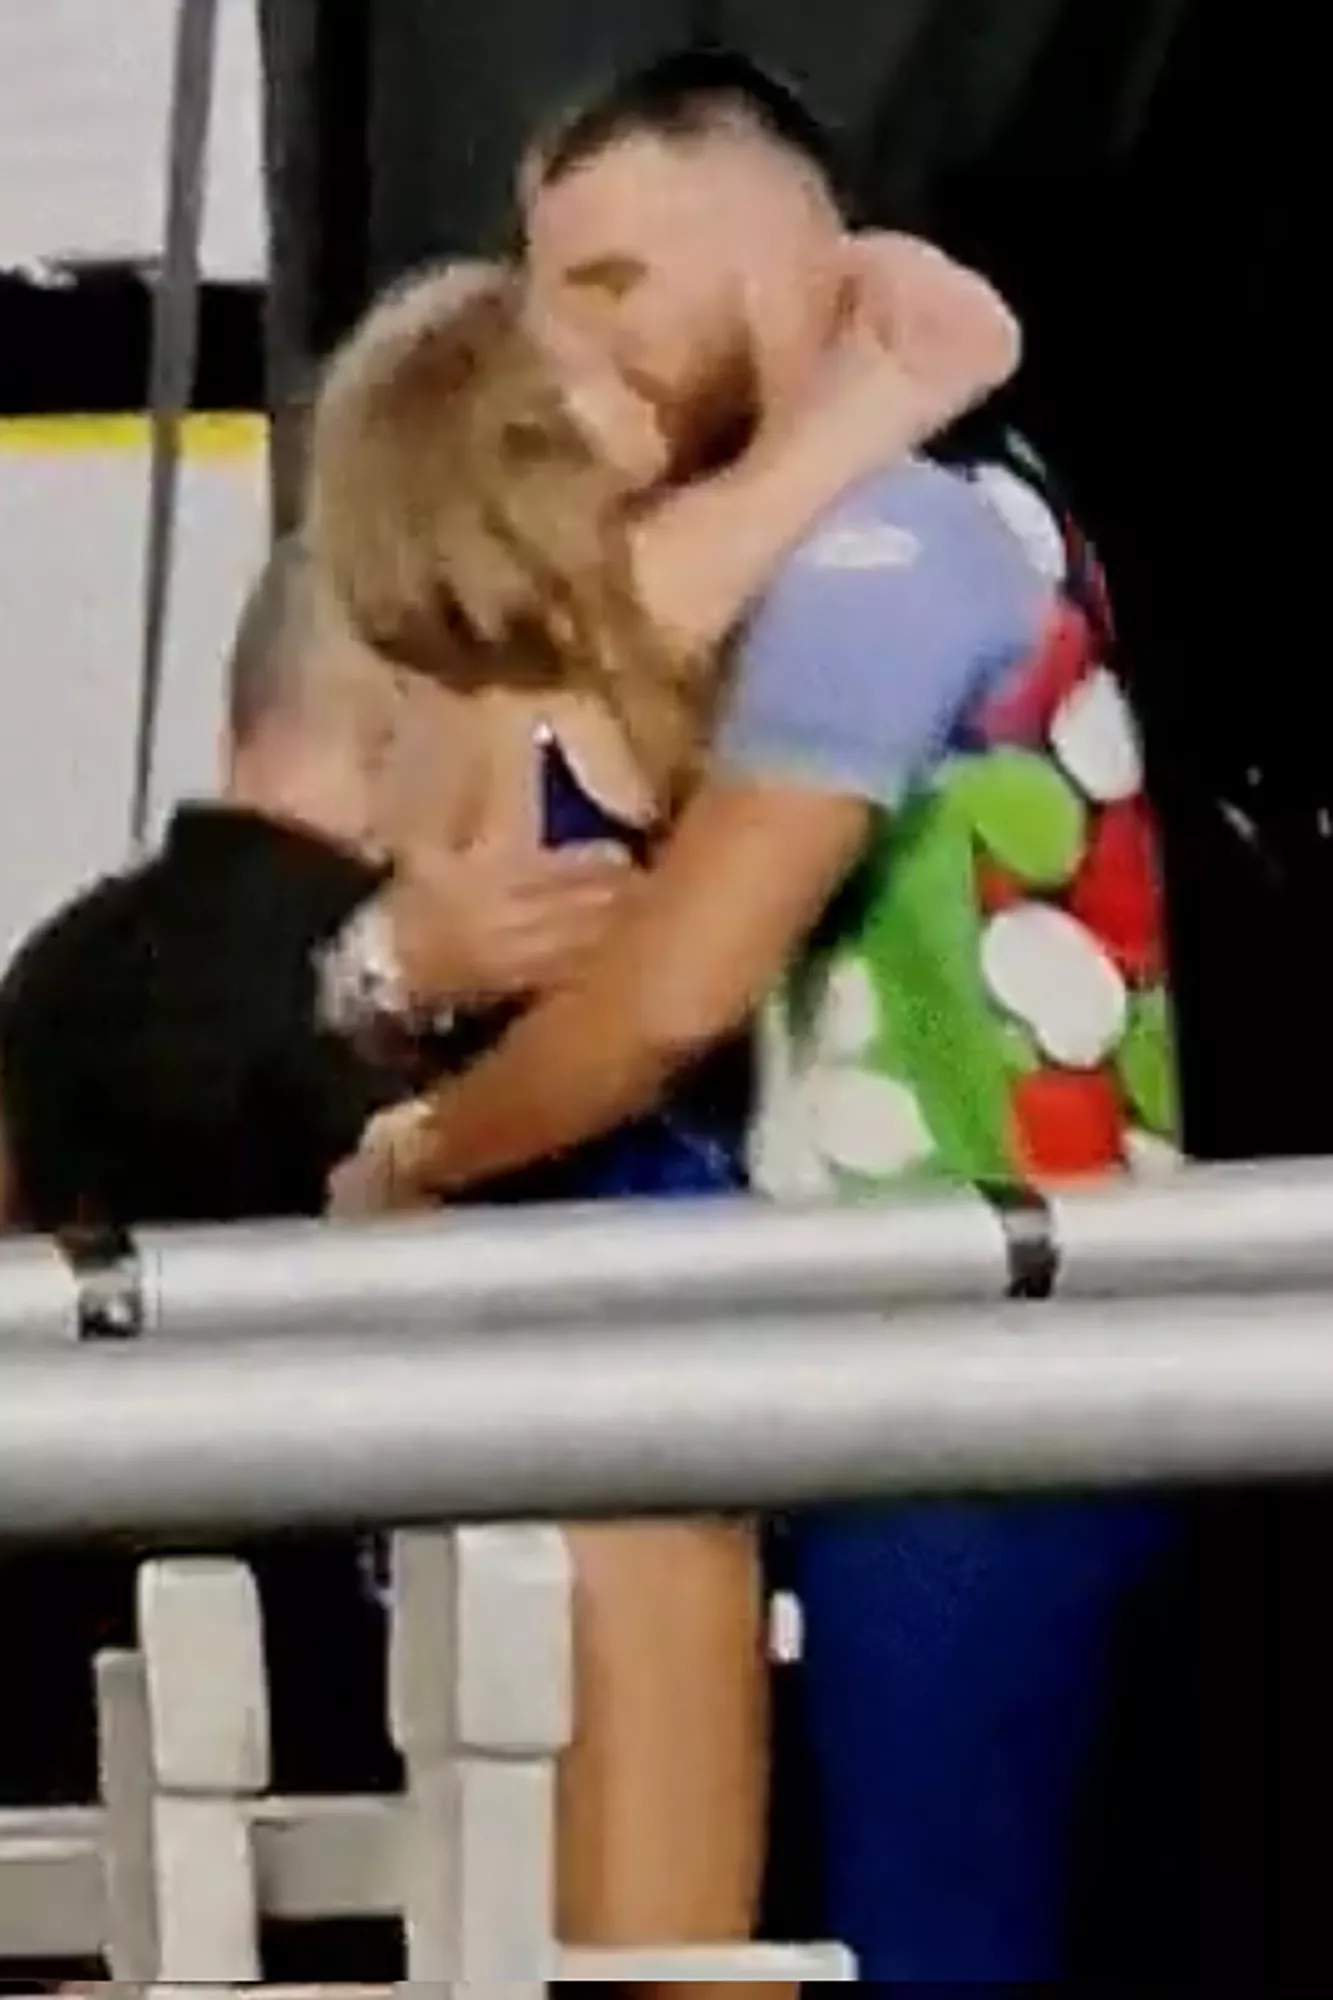 Following her performance in Argentina, Taylor Swift storms into Travis Kelce's arms and plants a kiss.